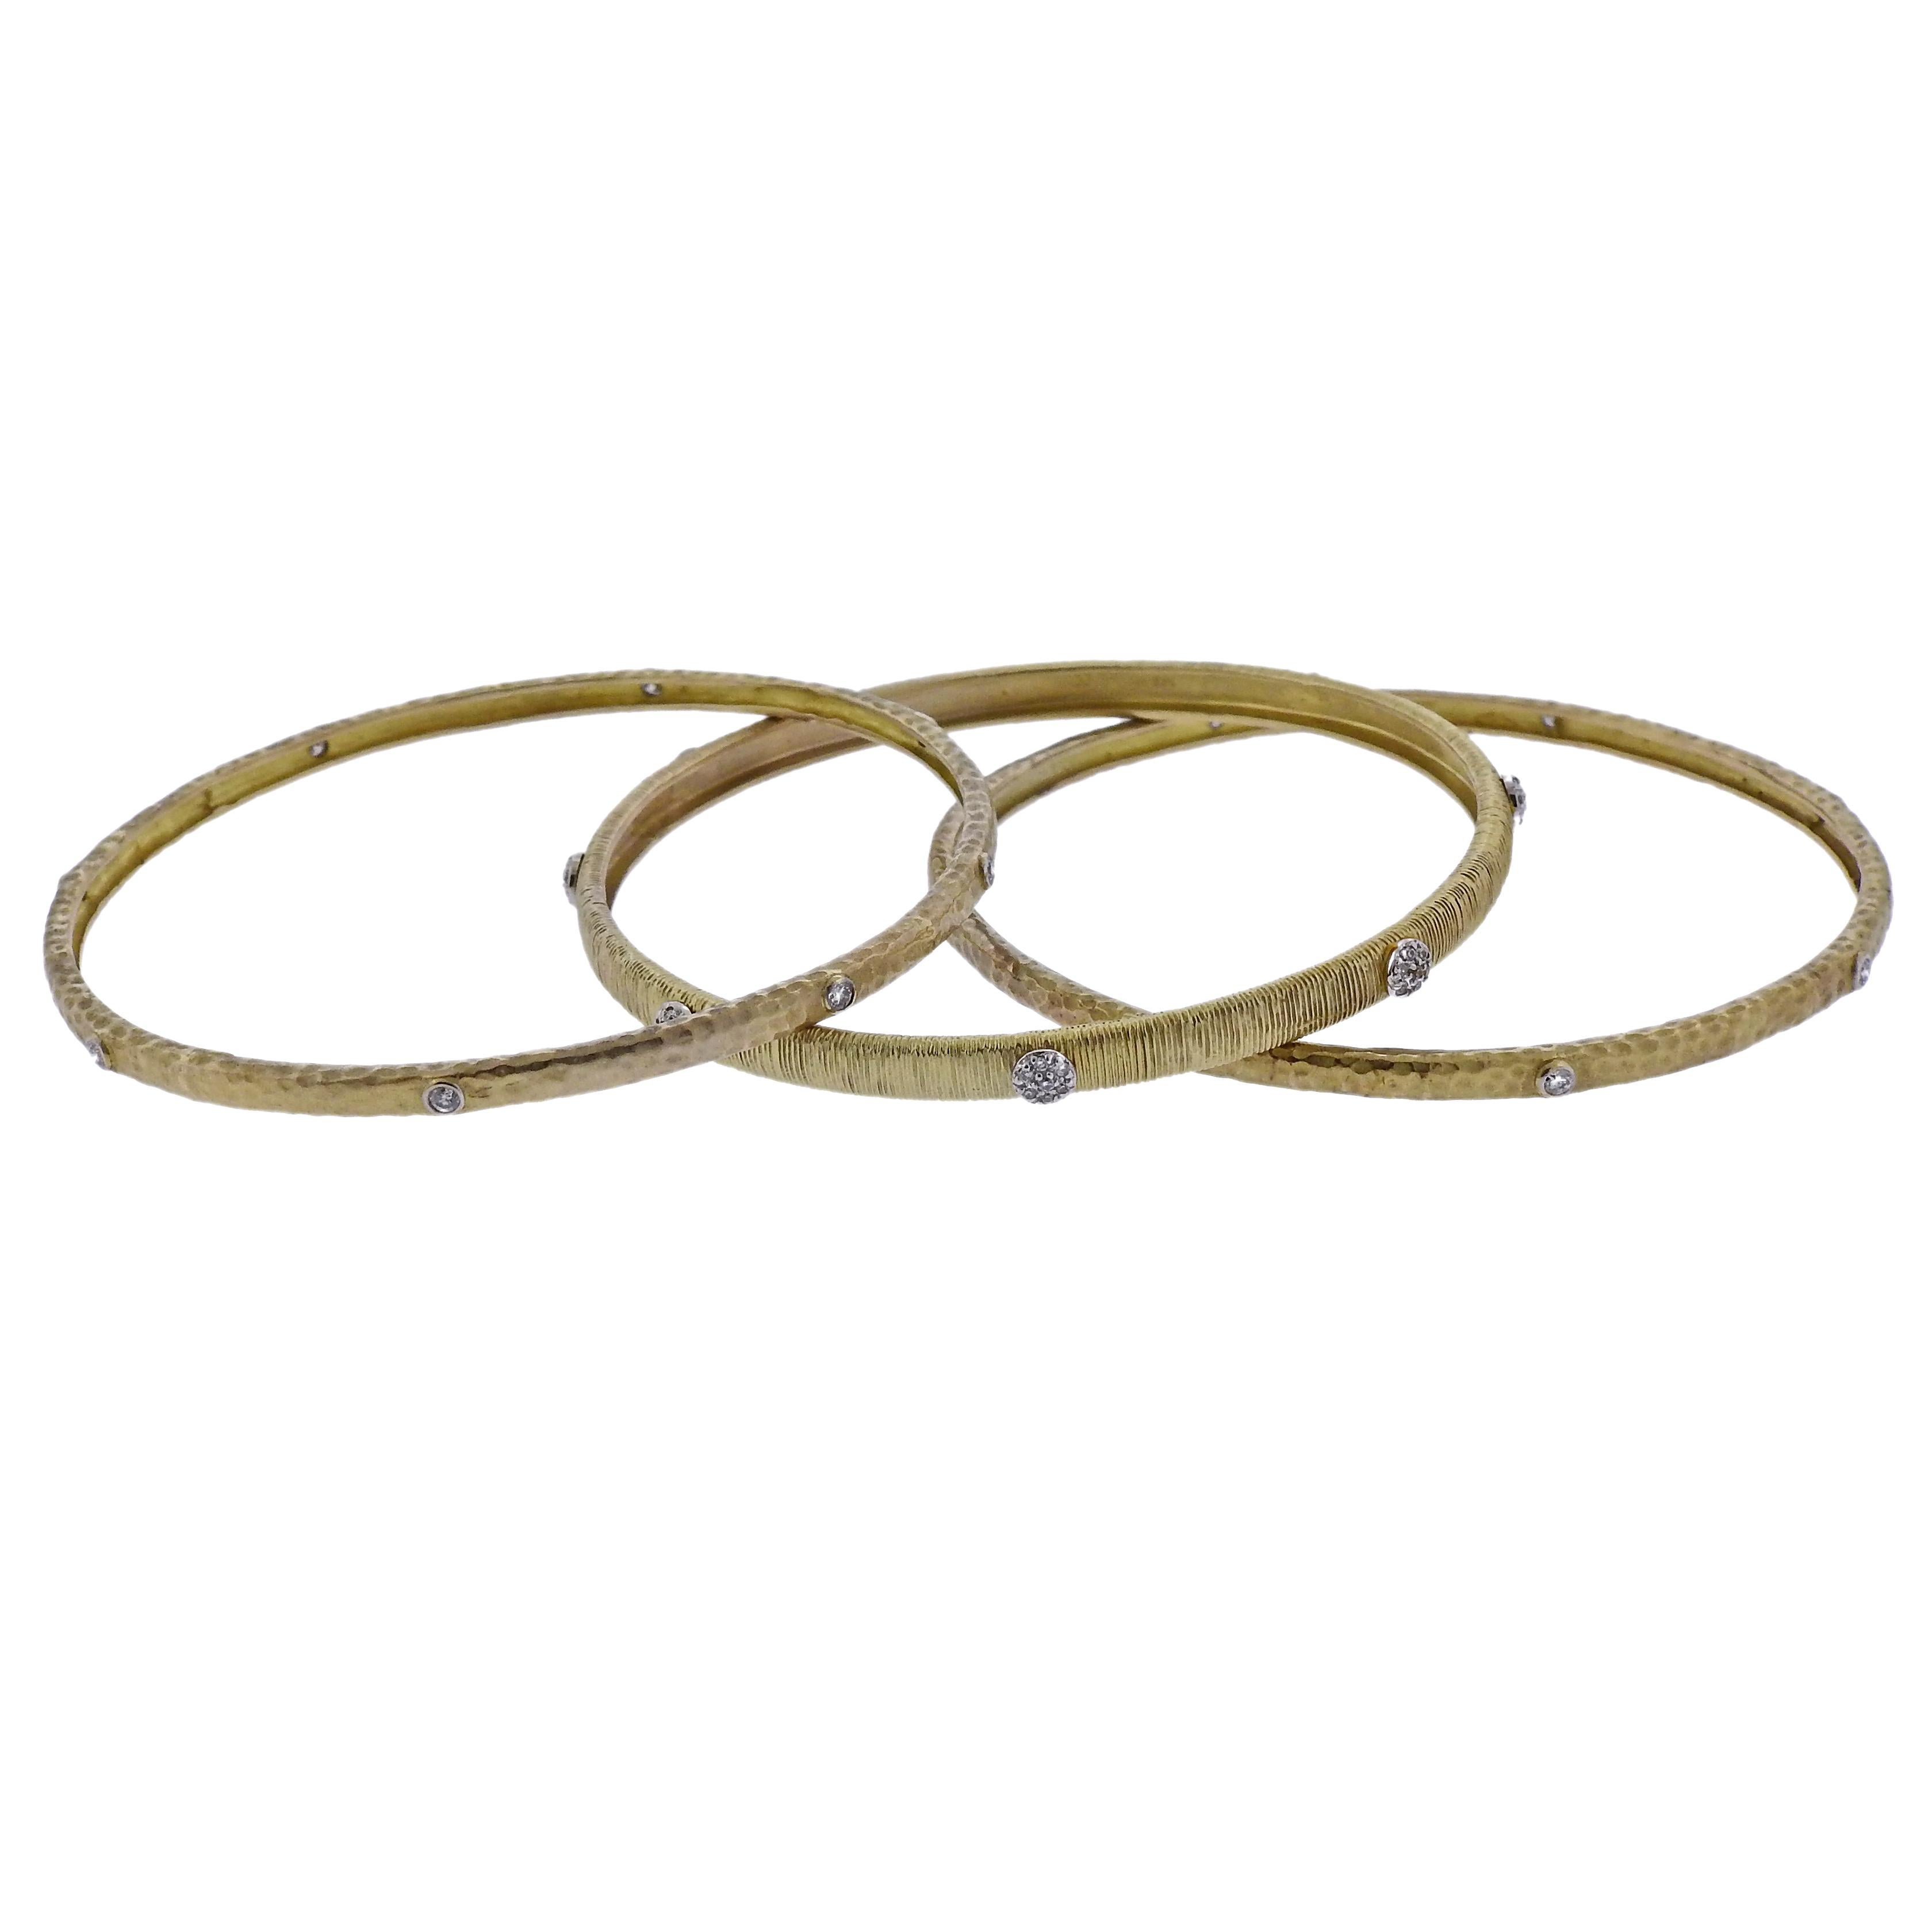 Set of three 14k gold bangle bracelets, all set with a total of approx. 0.56ctw in diamonds. Bracelets will fit approx. 7